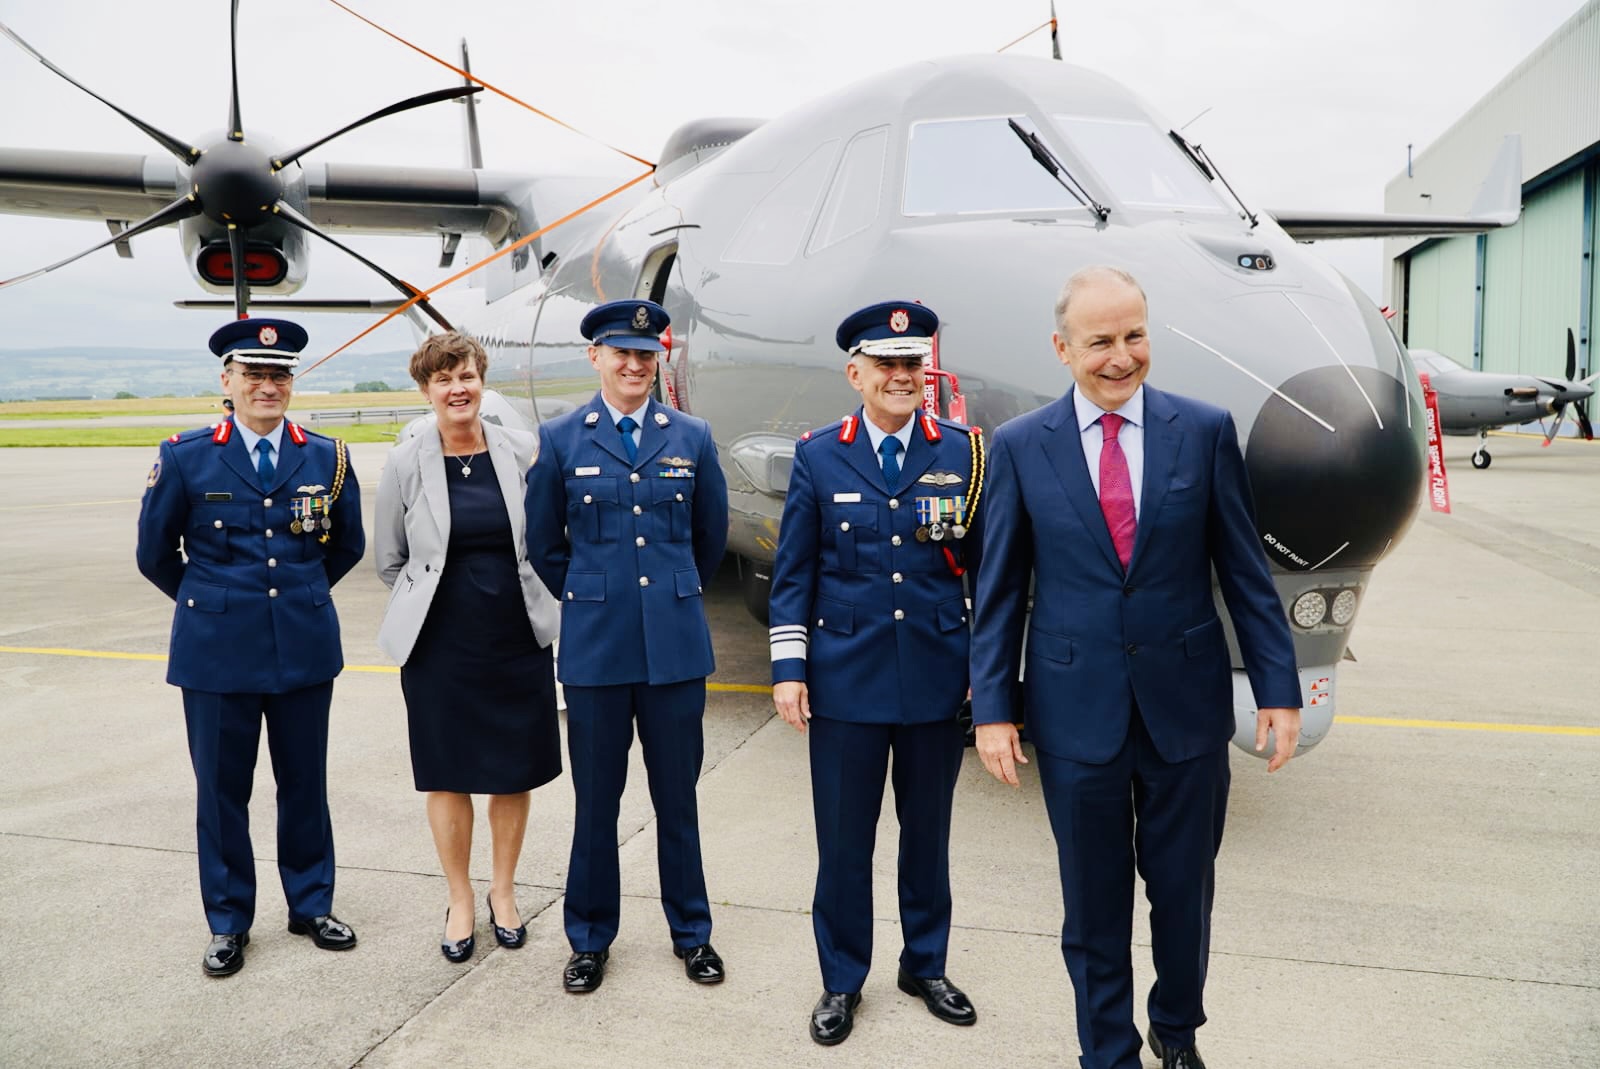 Tánaiste and Minister for Defence Micheál Martin, Department of Defence Secretary General, Jacqui McCrum and Chief of Staff, Seán Clancy, and was met by General Officer Commanding the Air Corps, Brigadier General Rory O’Connor as well as members of the team involved in delivering the project and representatives from Airbus Defence and Space.